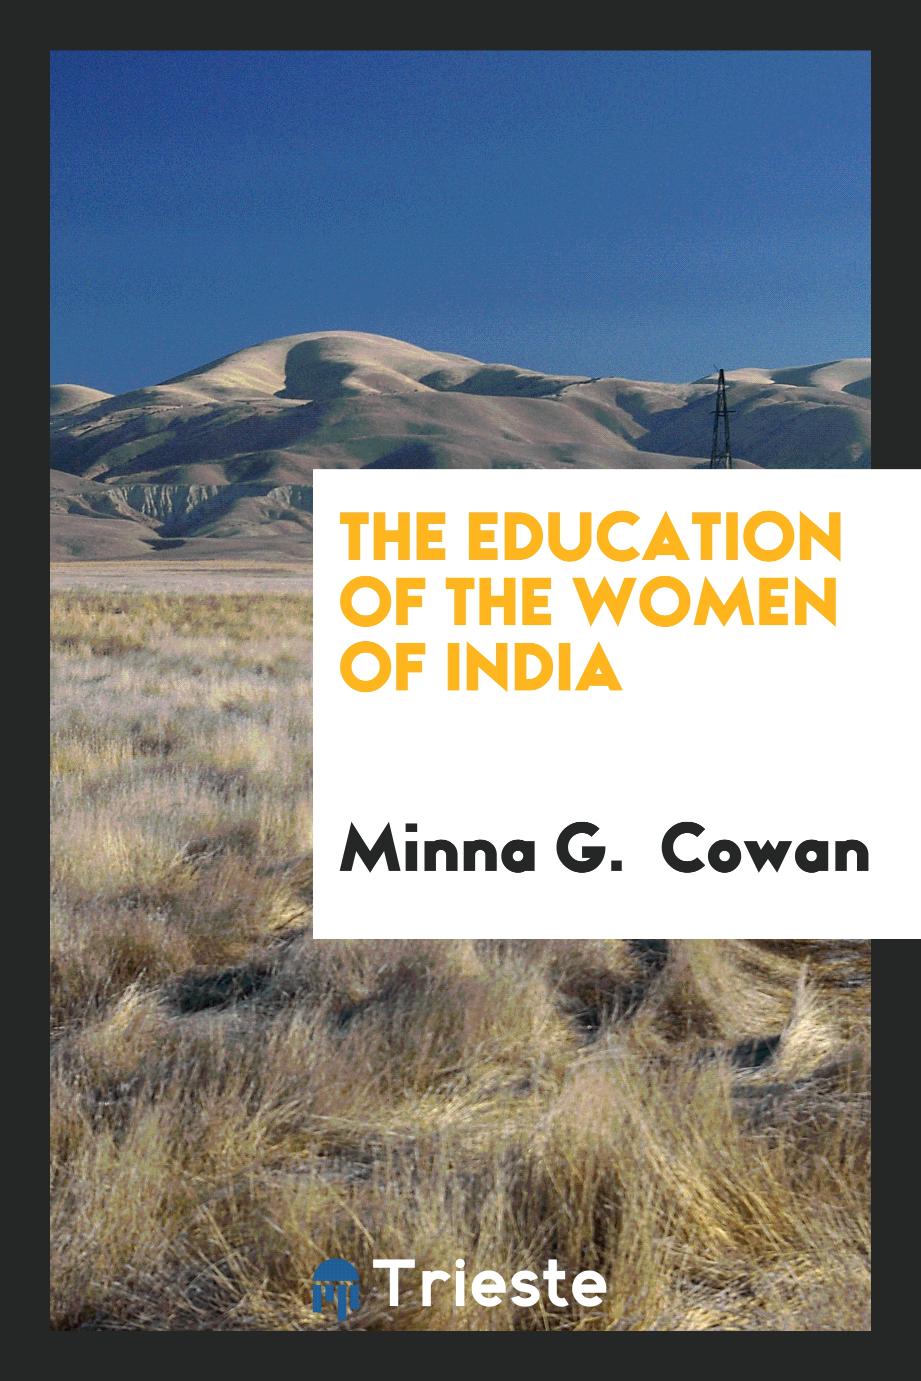 The education of the Women of India